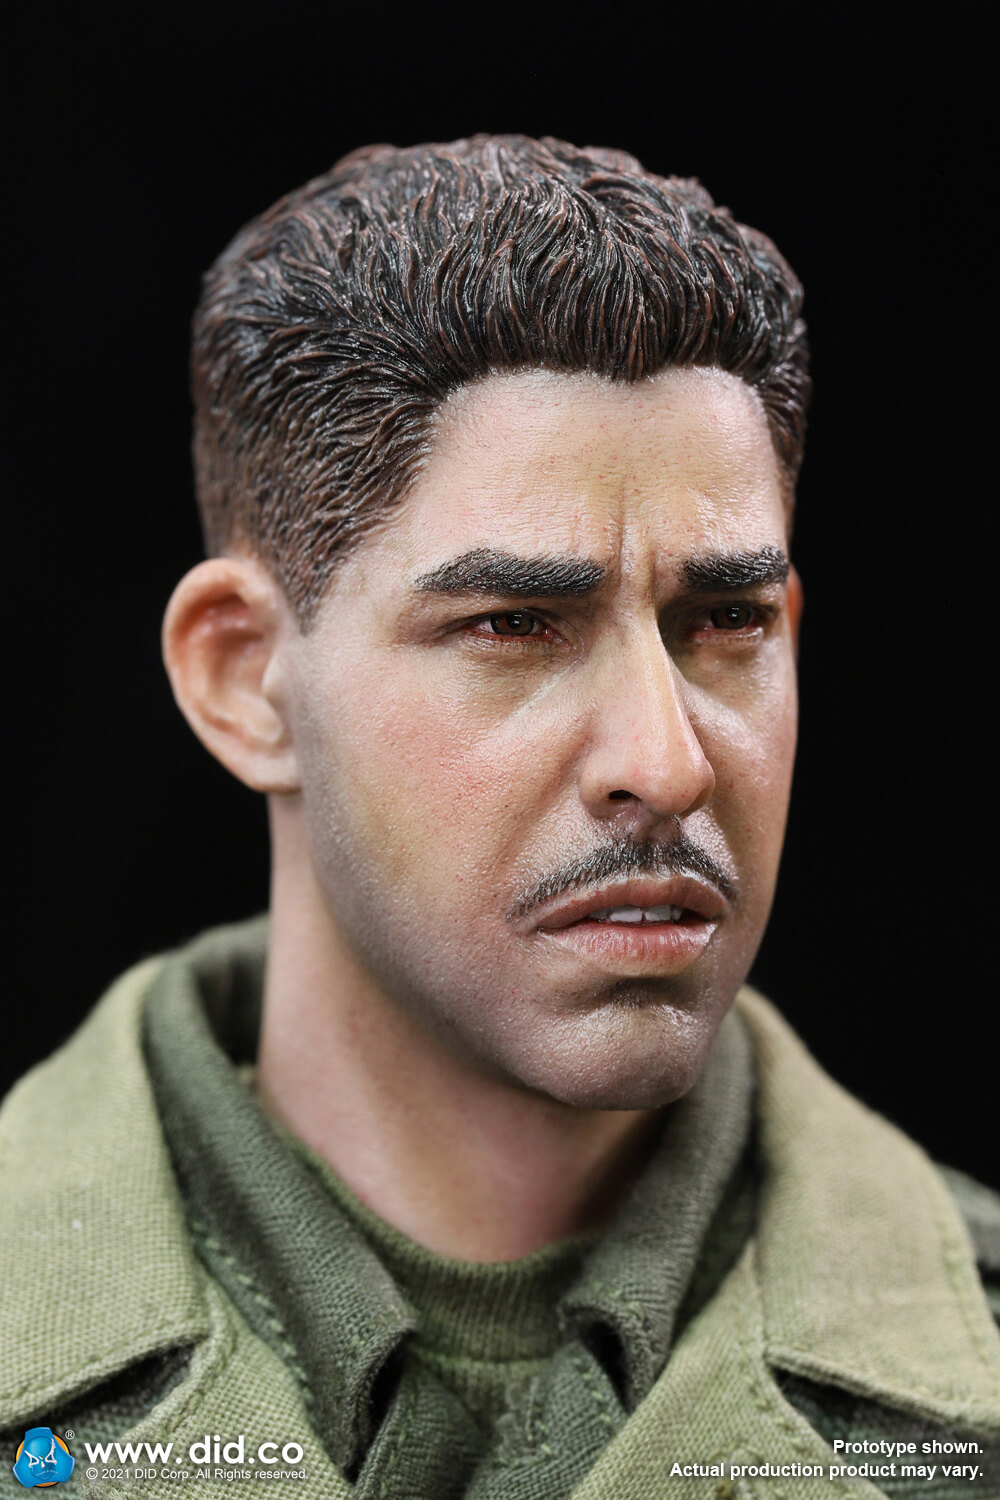 2nddRangerBattalion - NEW PRODUCT: DiD: A80155  WWII US 2nd Ranger Battalion Series 6 – Private Mellish 15320